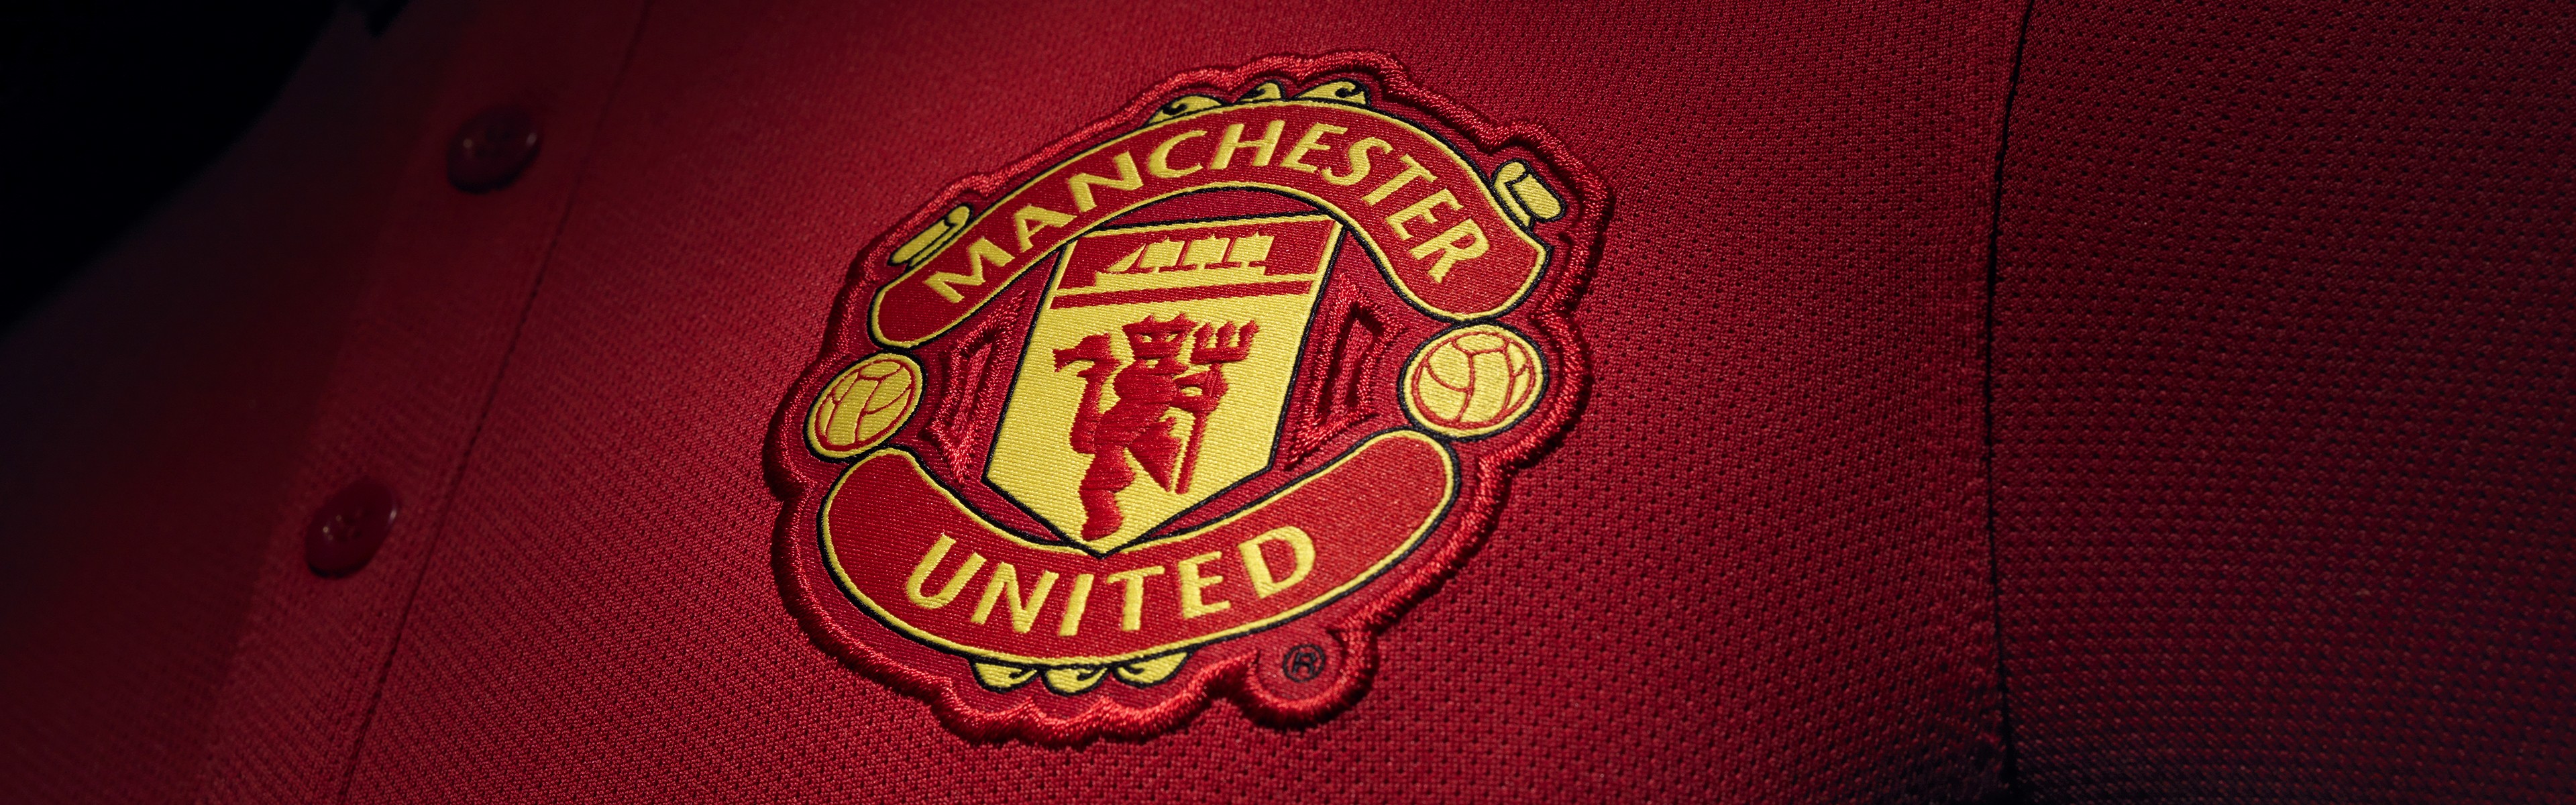 Manchester United, Logo, Sports Jerseys, Soccer Clubs, Premier League, Multiple Display, Dual Monitors Wallpaper